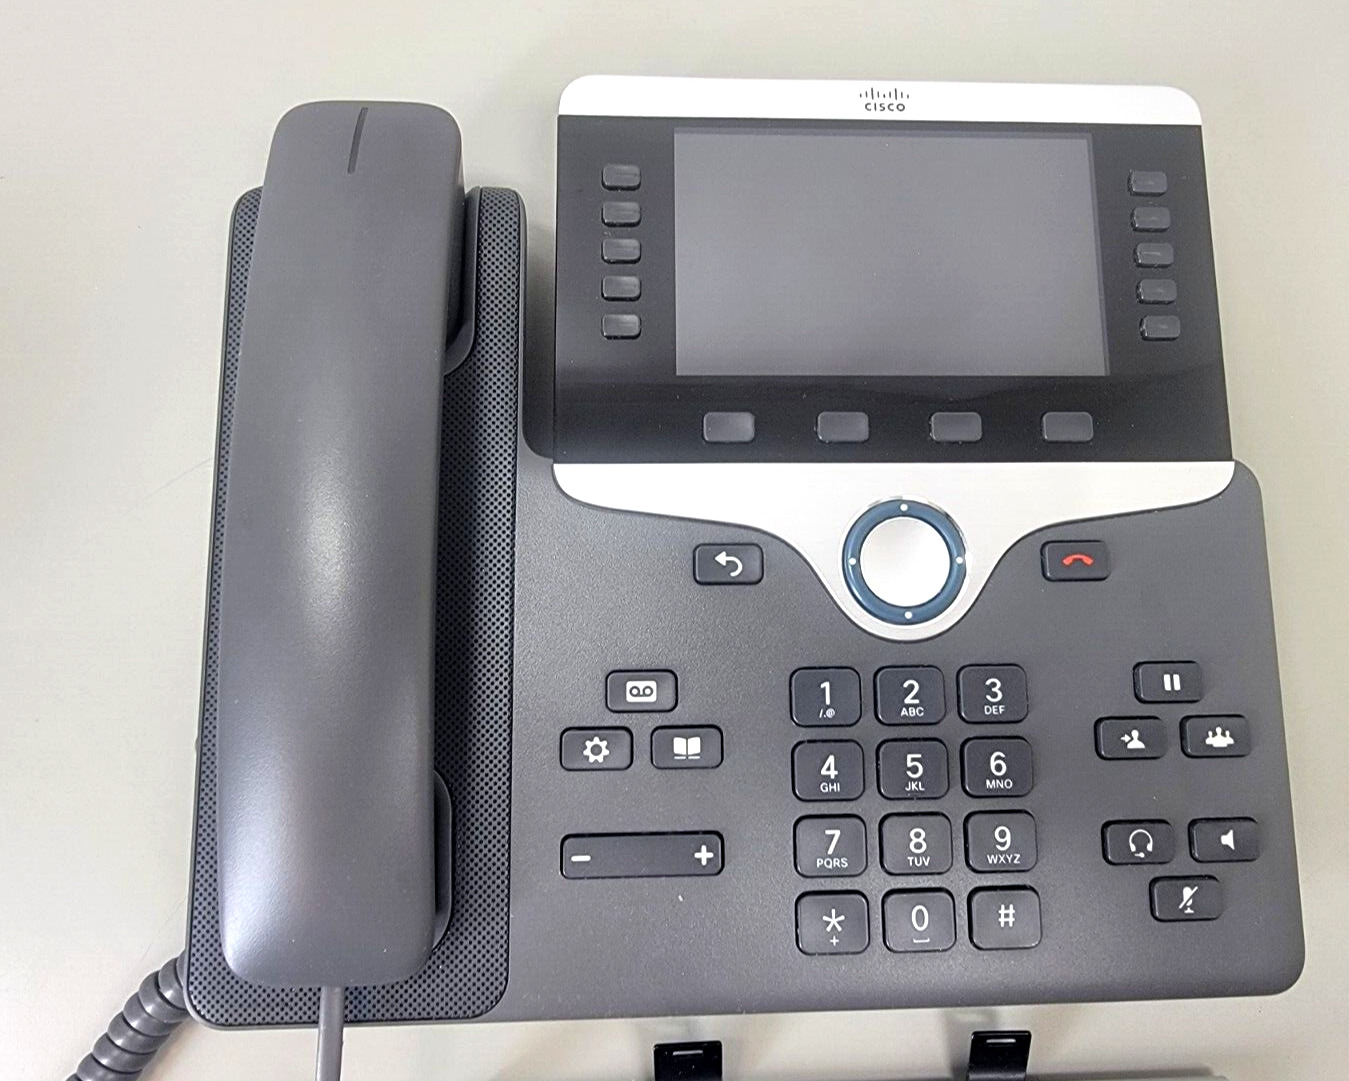 Cisco CP-8841-K9 5 Lines Widescreen LCD VoIP Phone, w/ Base Cleaned & Tested